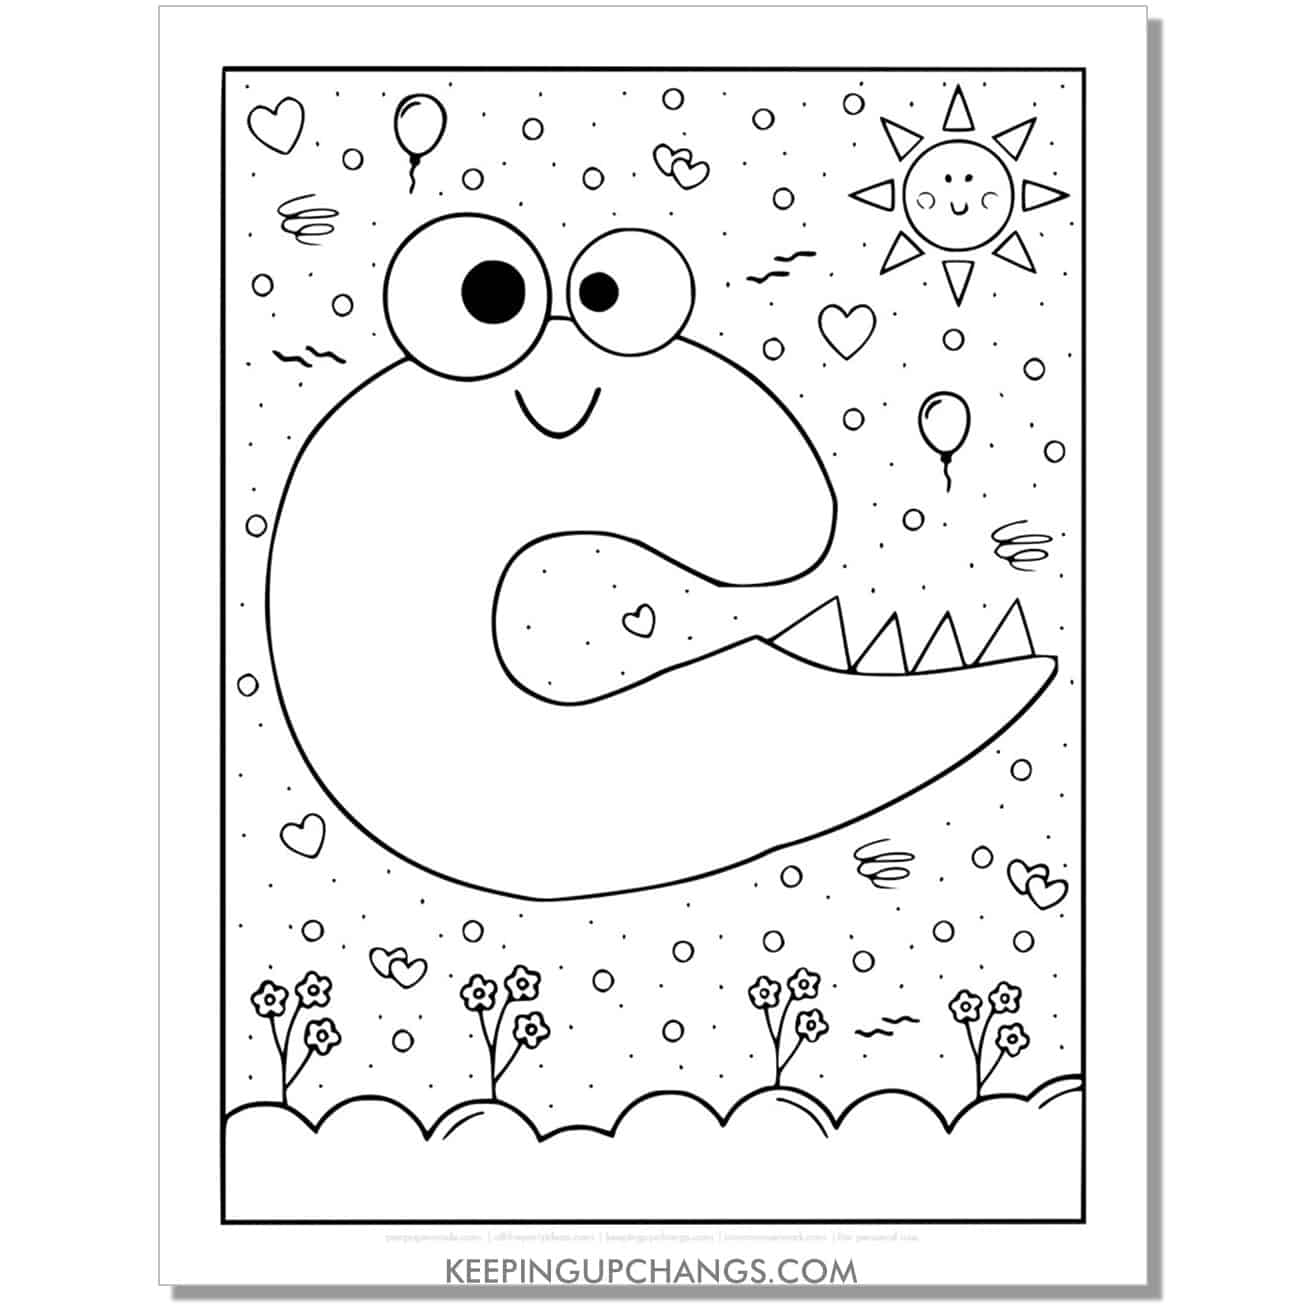 cute c coloring page with monster dinosaur letter.